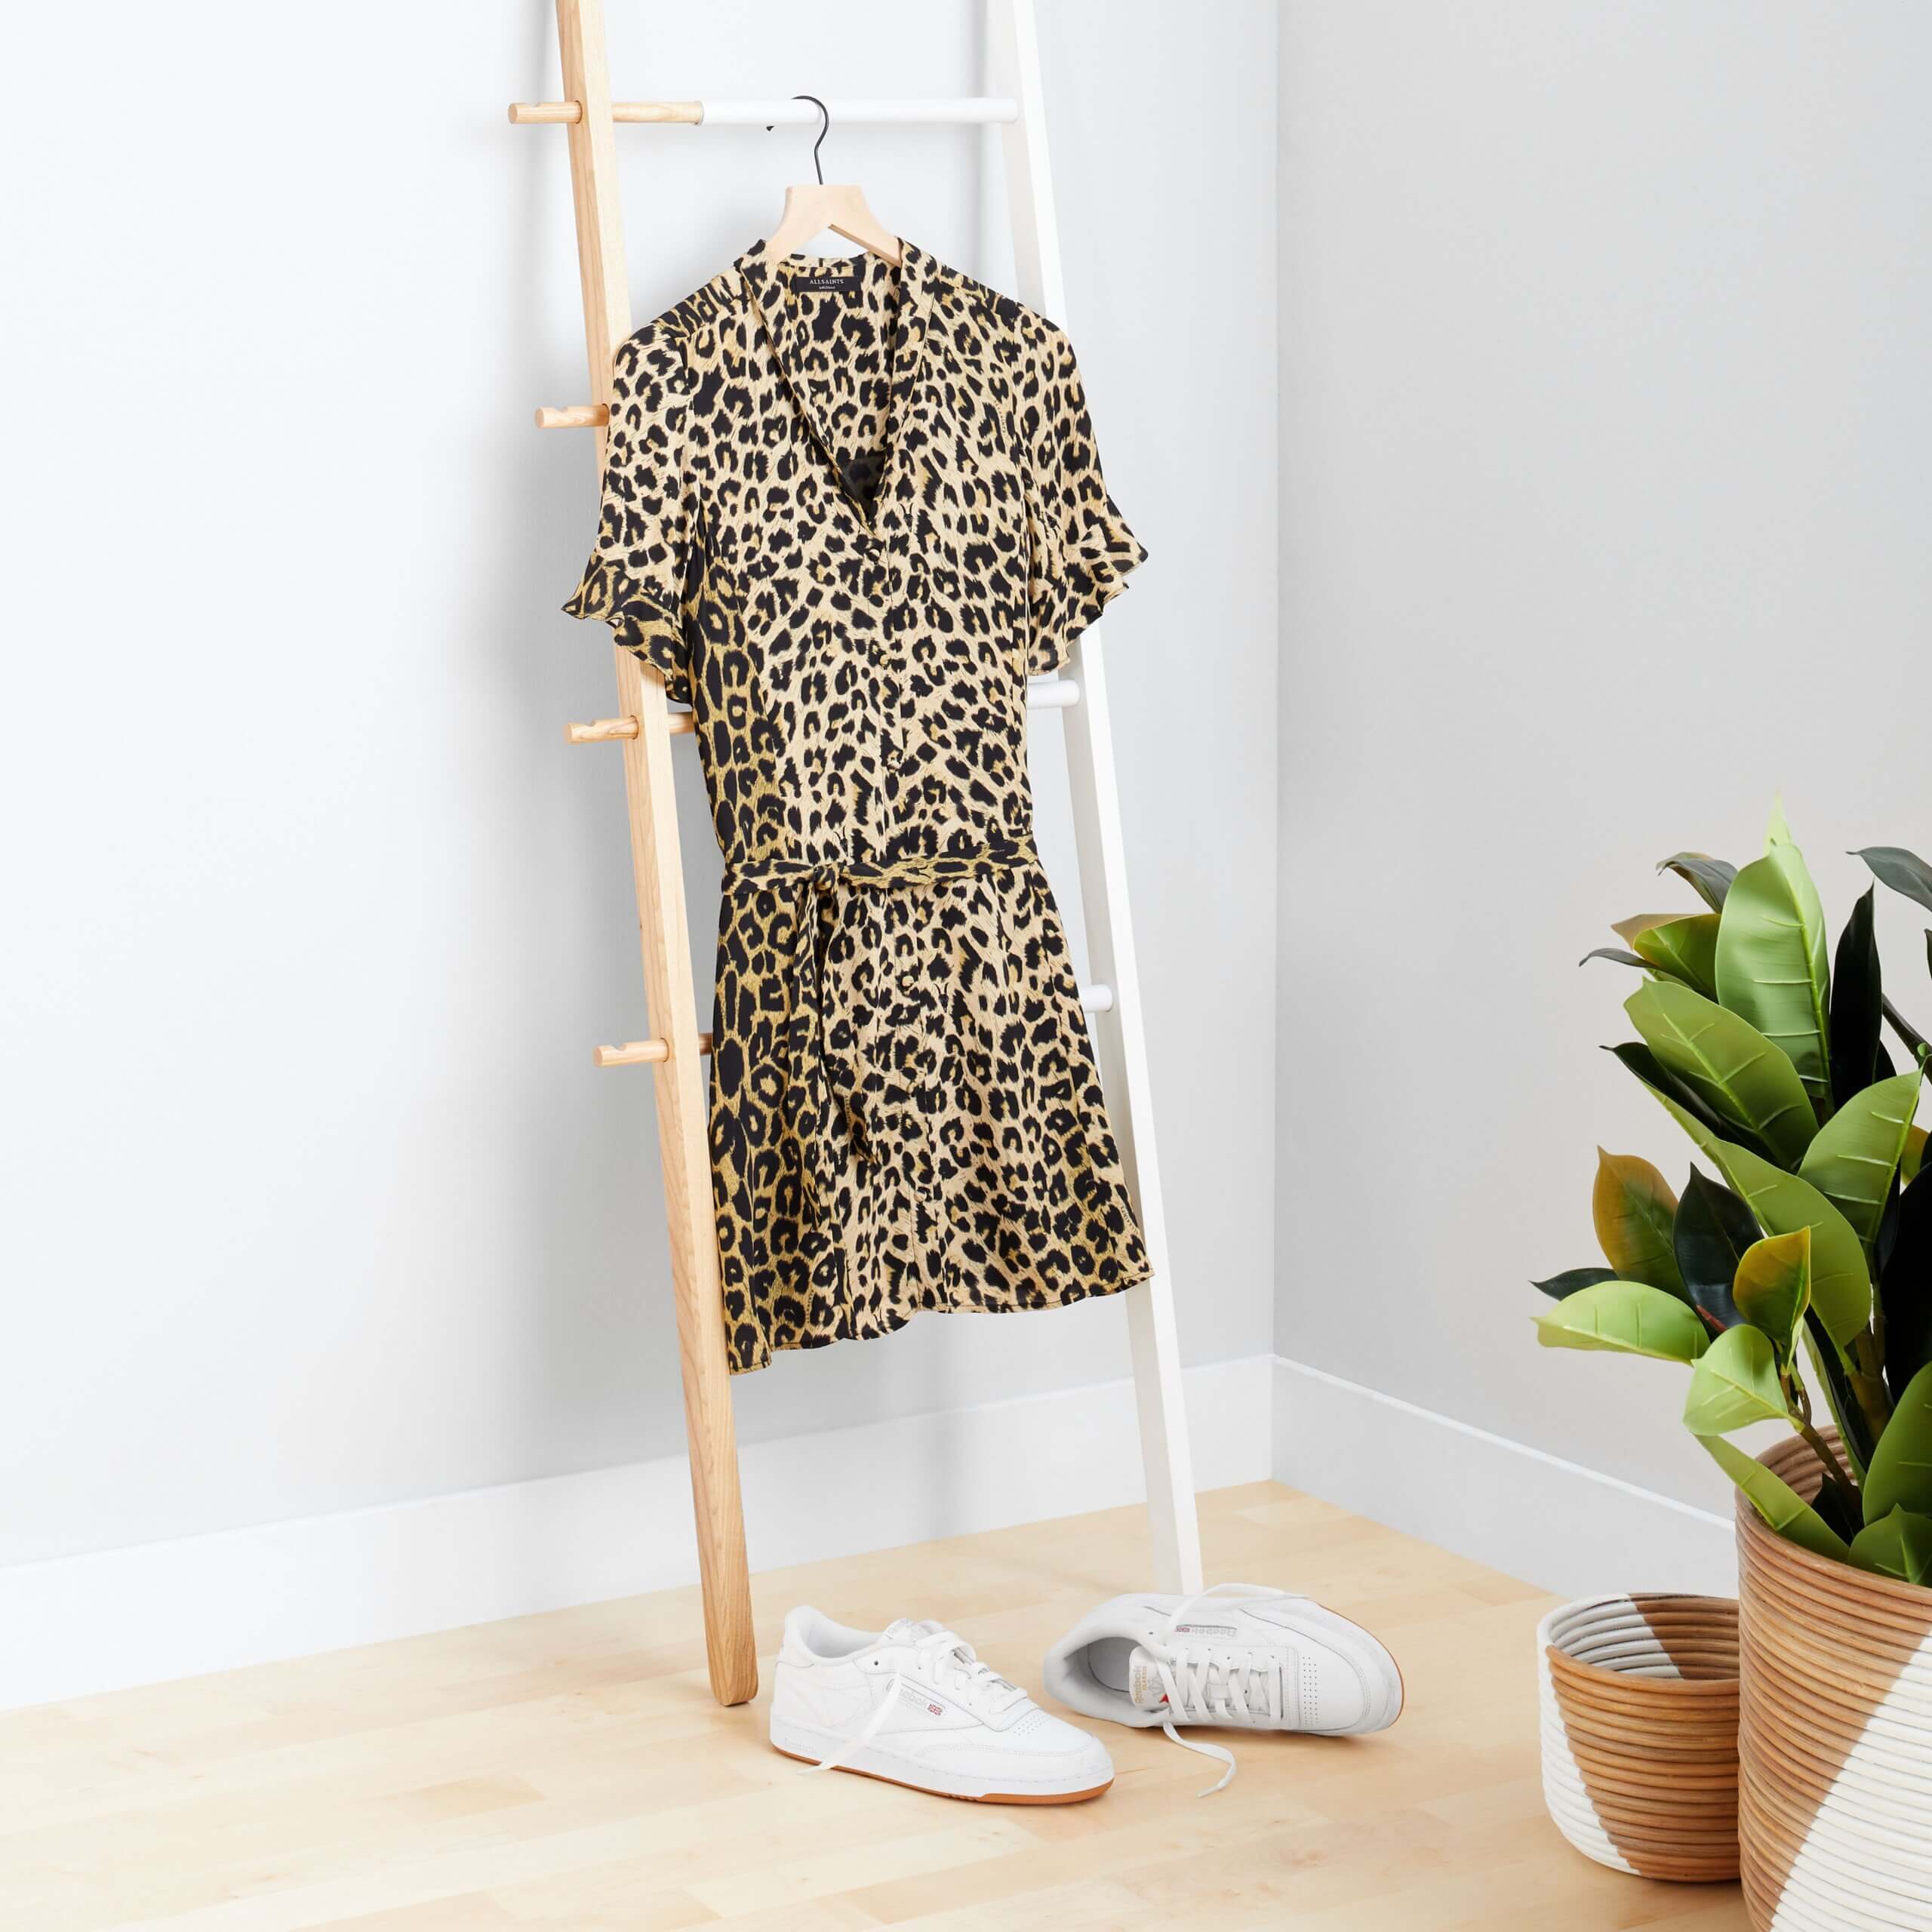 Stitch Fix Women's rack image with brown cheetah print dress hanging on wooden rack with white sneakers on the floor. 